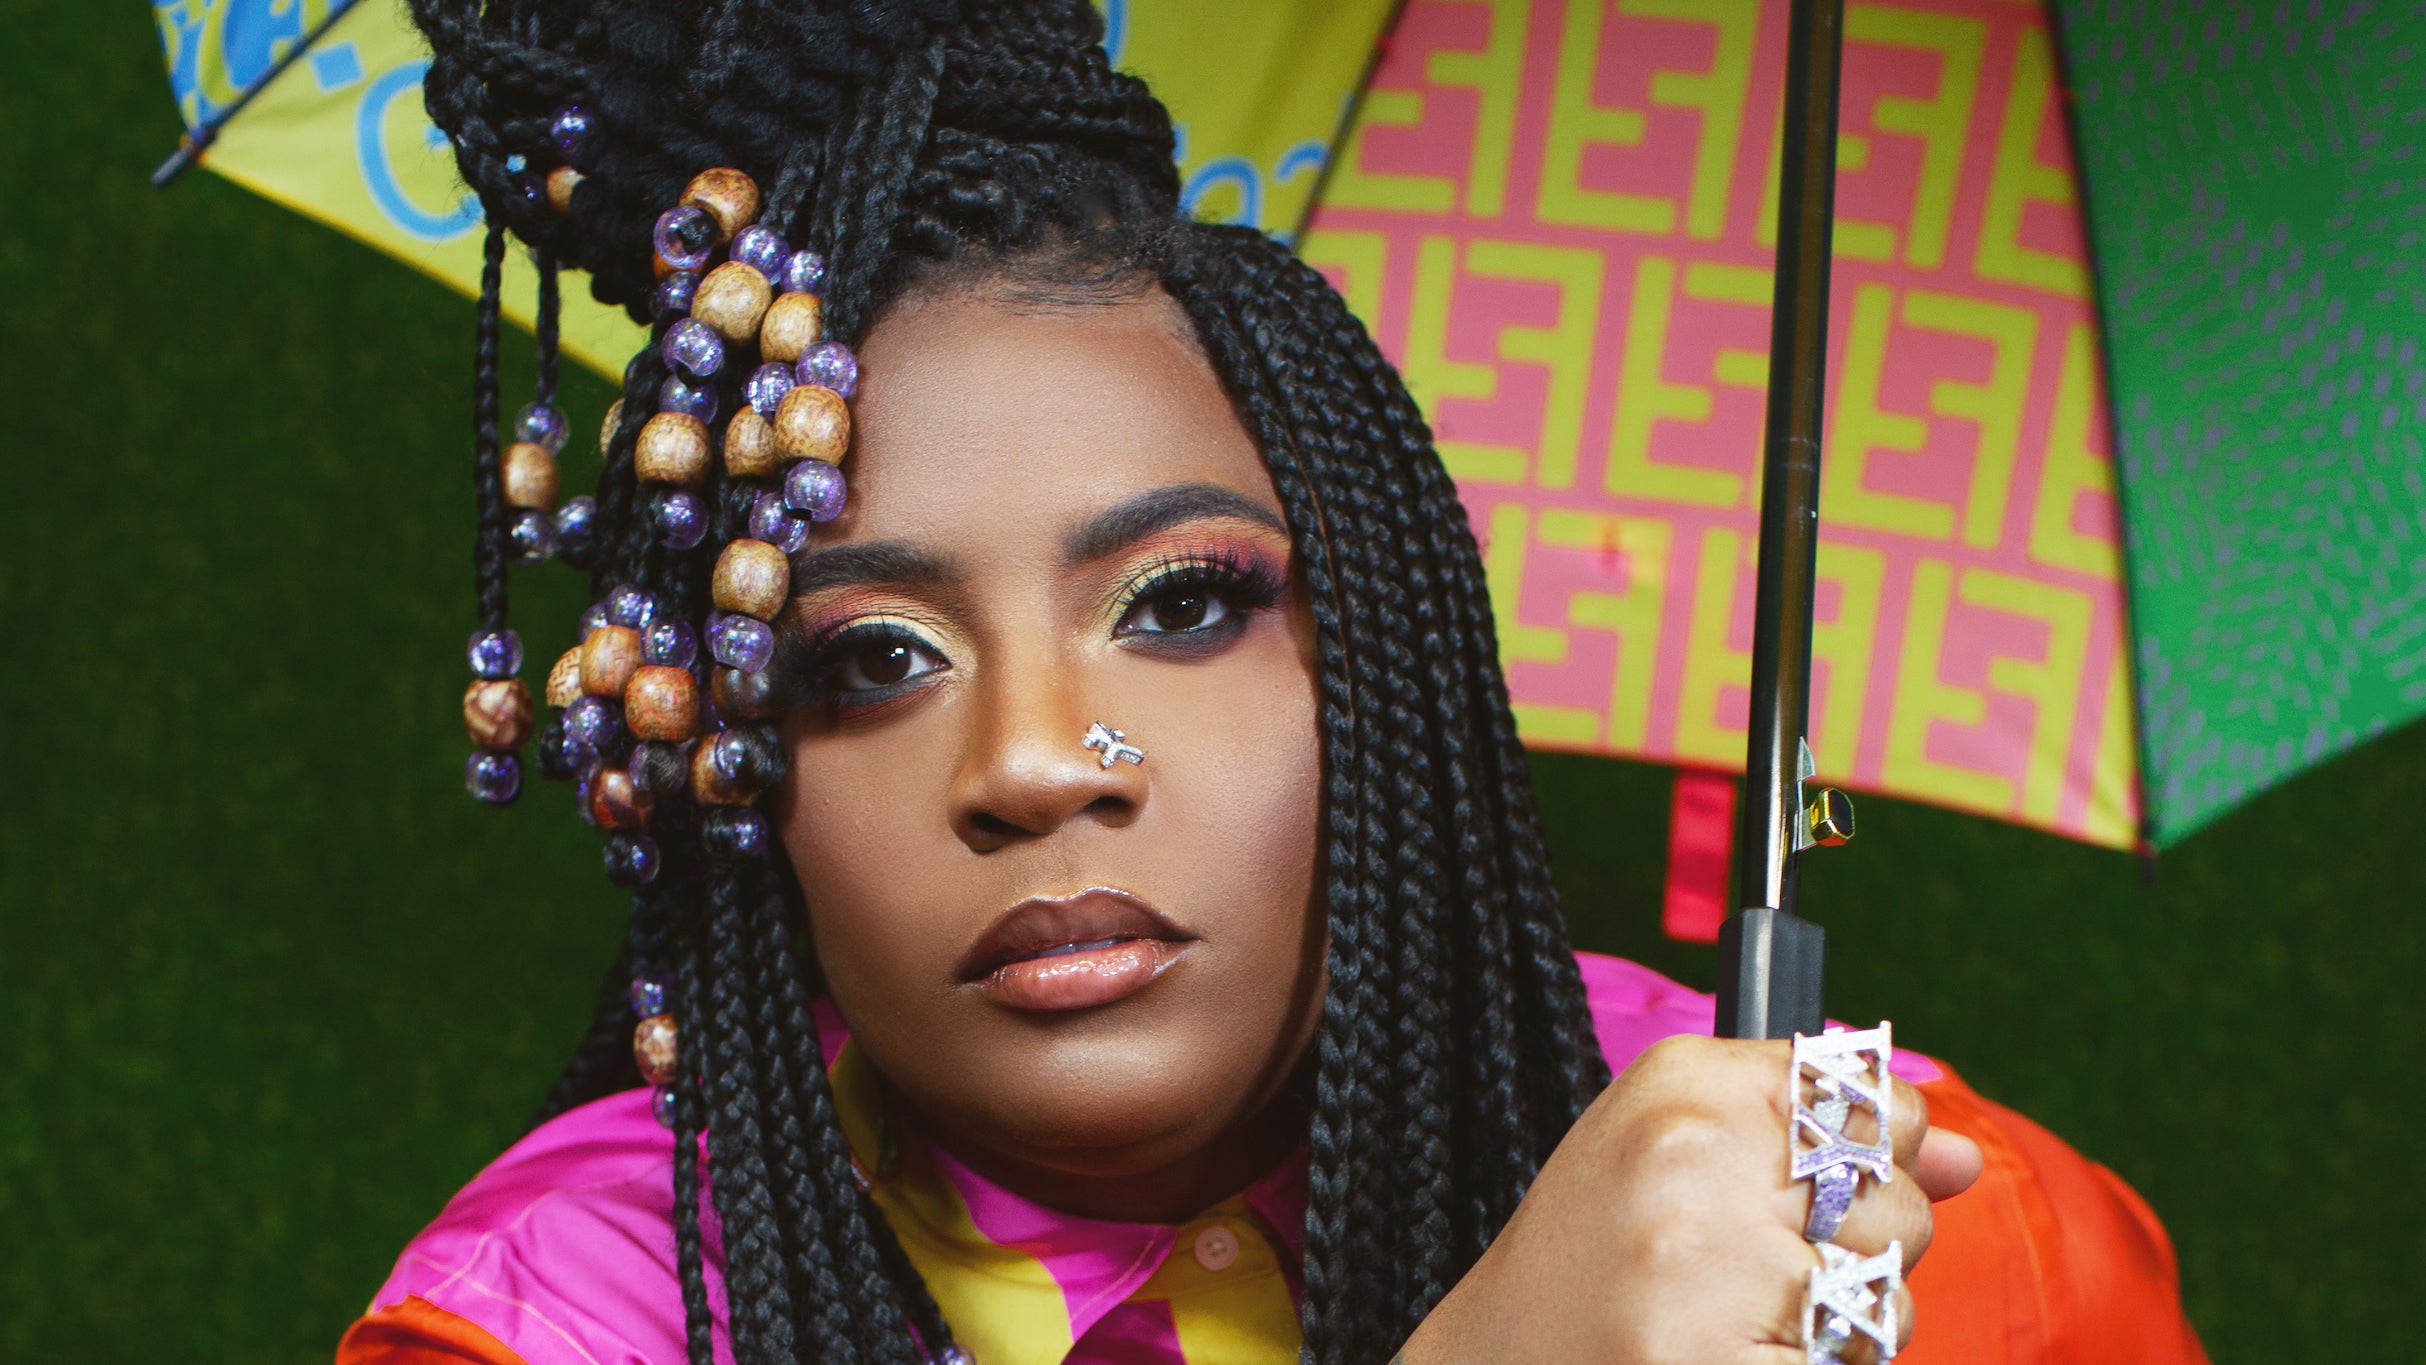 Kamaiyah presale code for event tickets in Los Angeles, CA (The Moroccan Lounge)